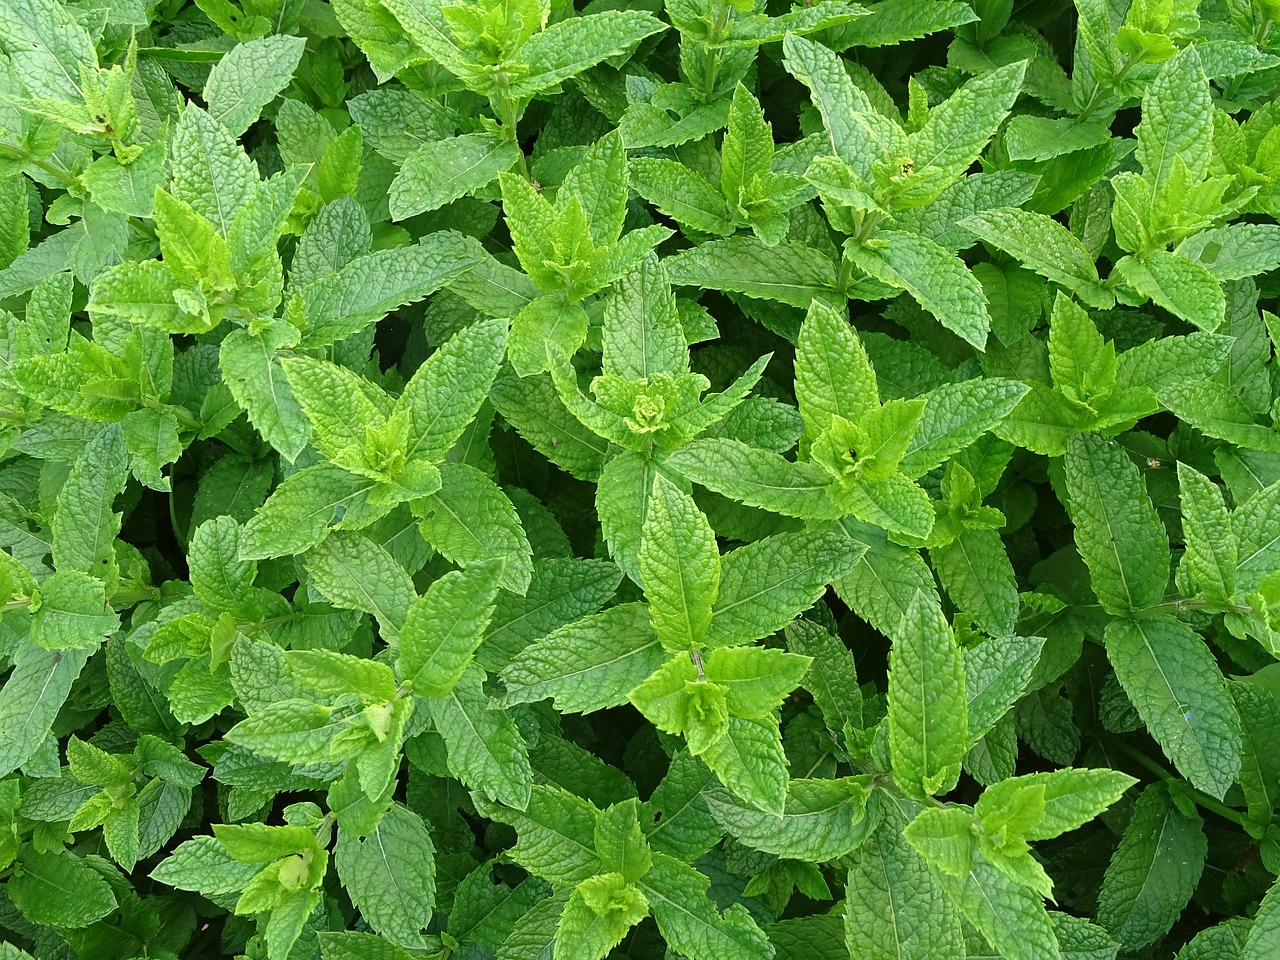 FIND OUT MORE ABOUT MINT